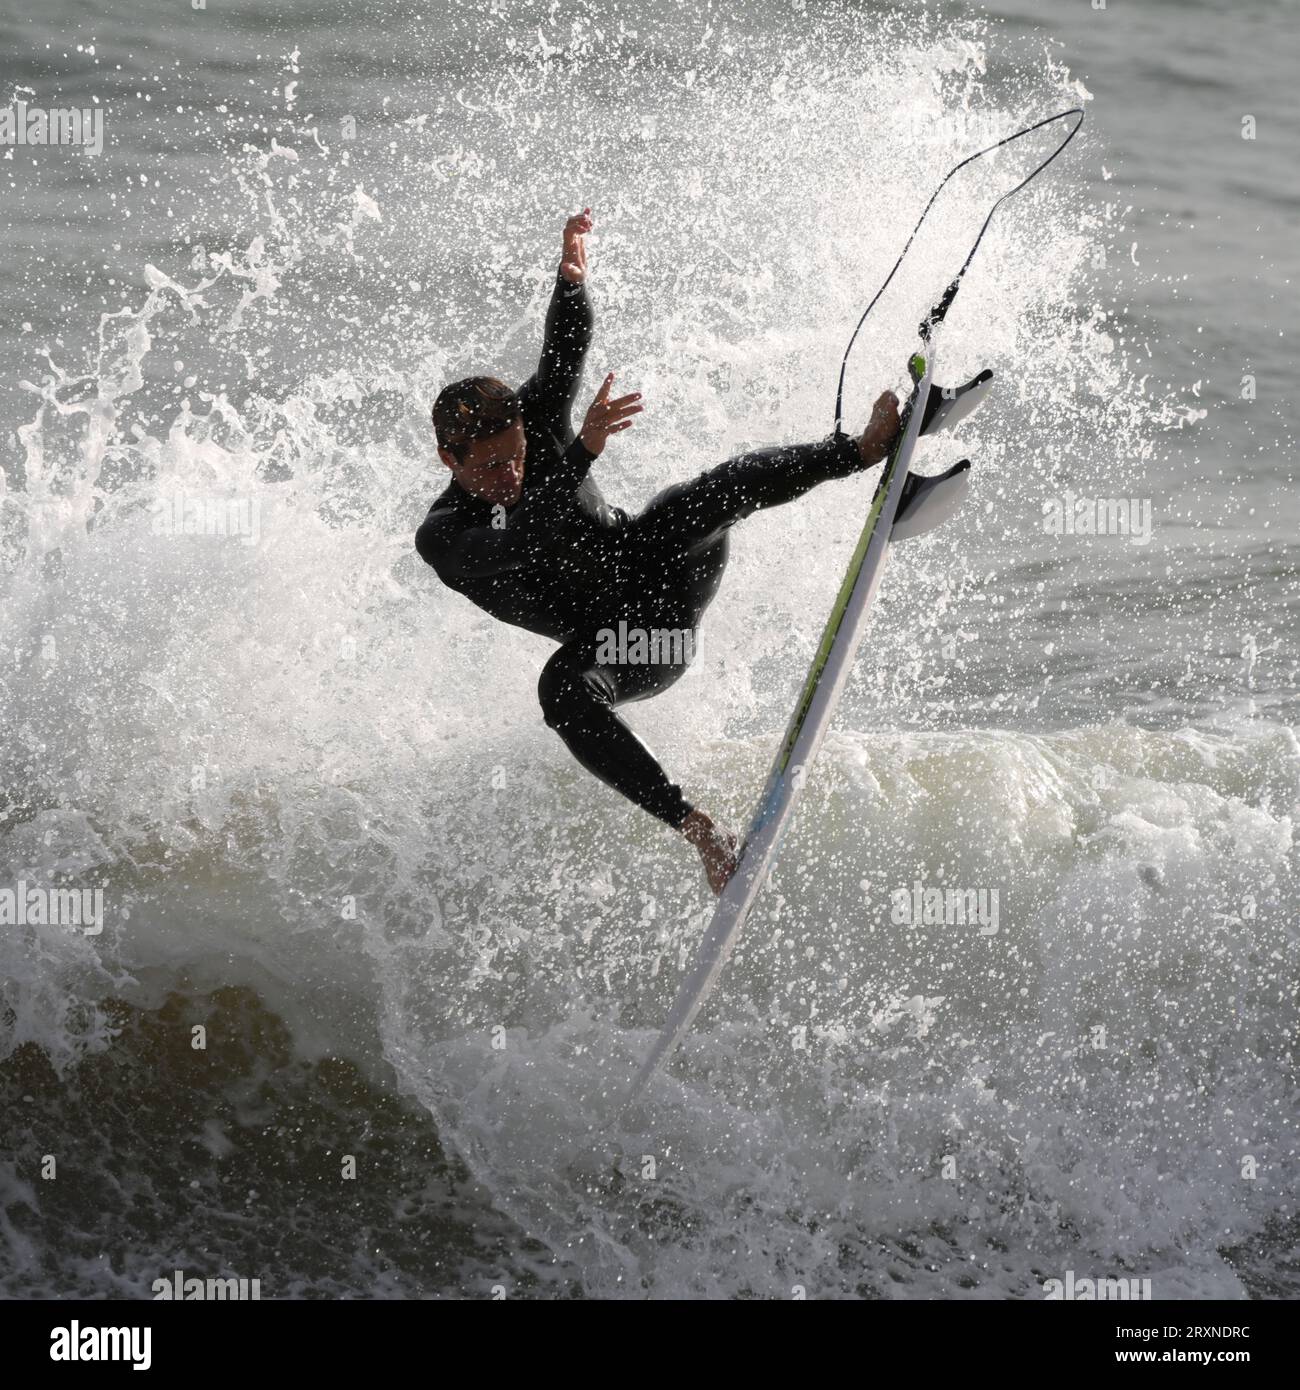 Surfer Patrick Langdon Dark performs at local Welsh break in readiness for Paris Olympics 2024 Stock Photo